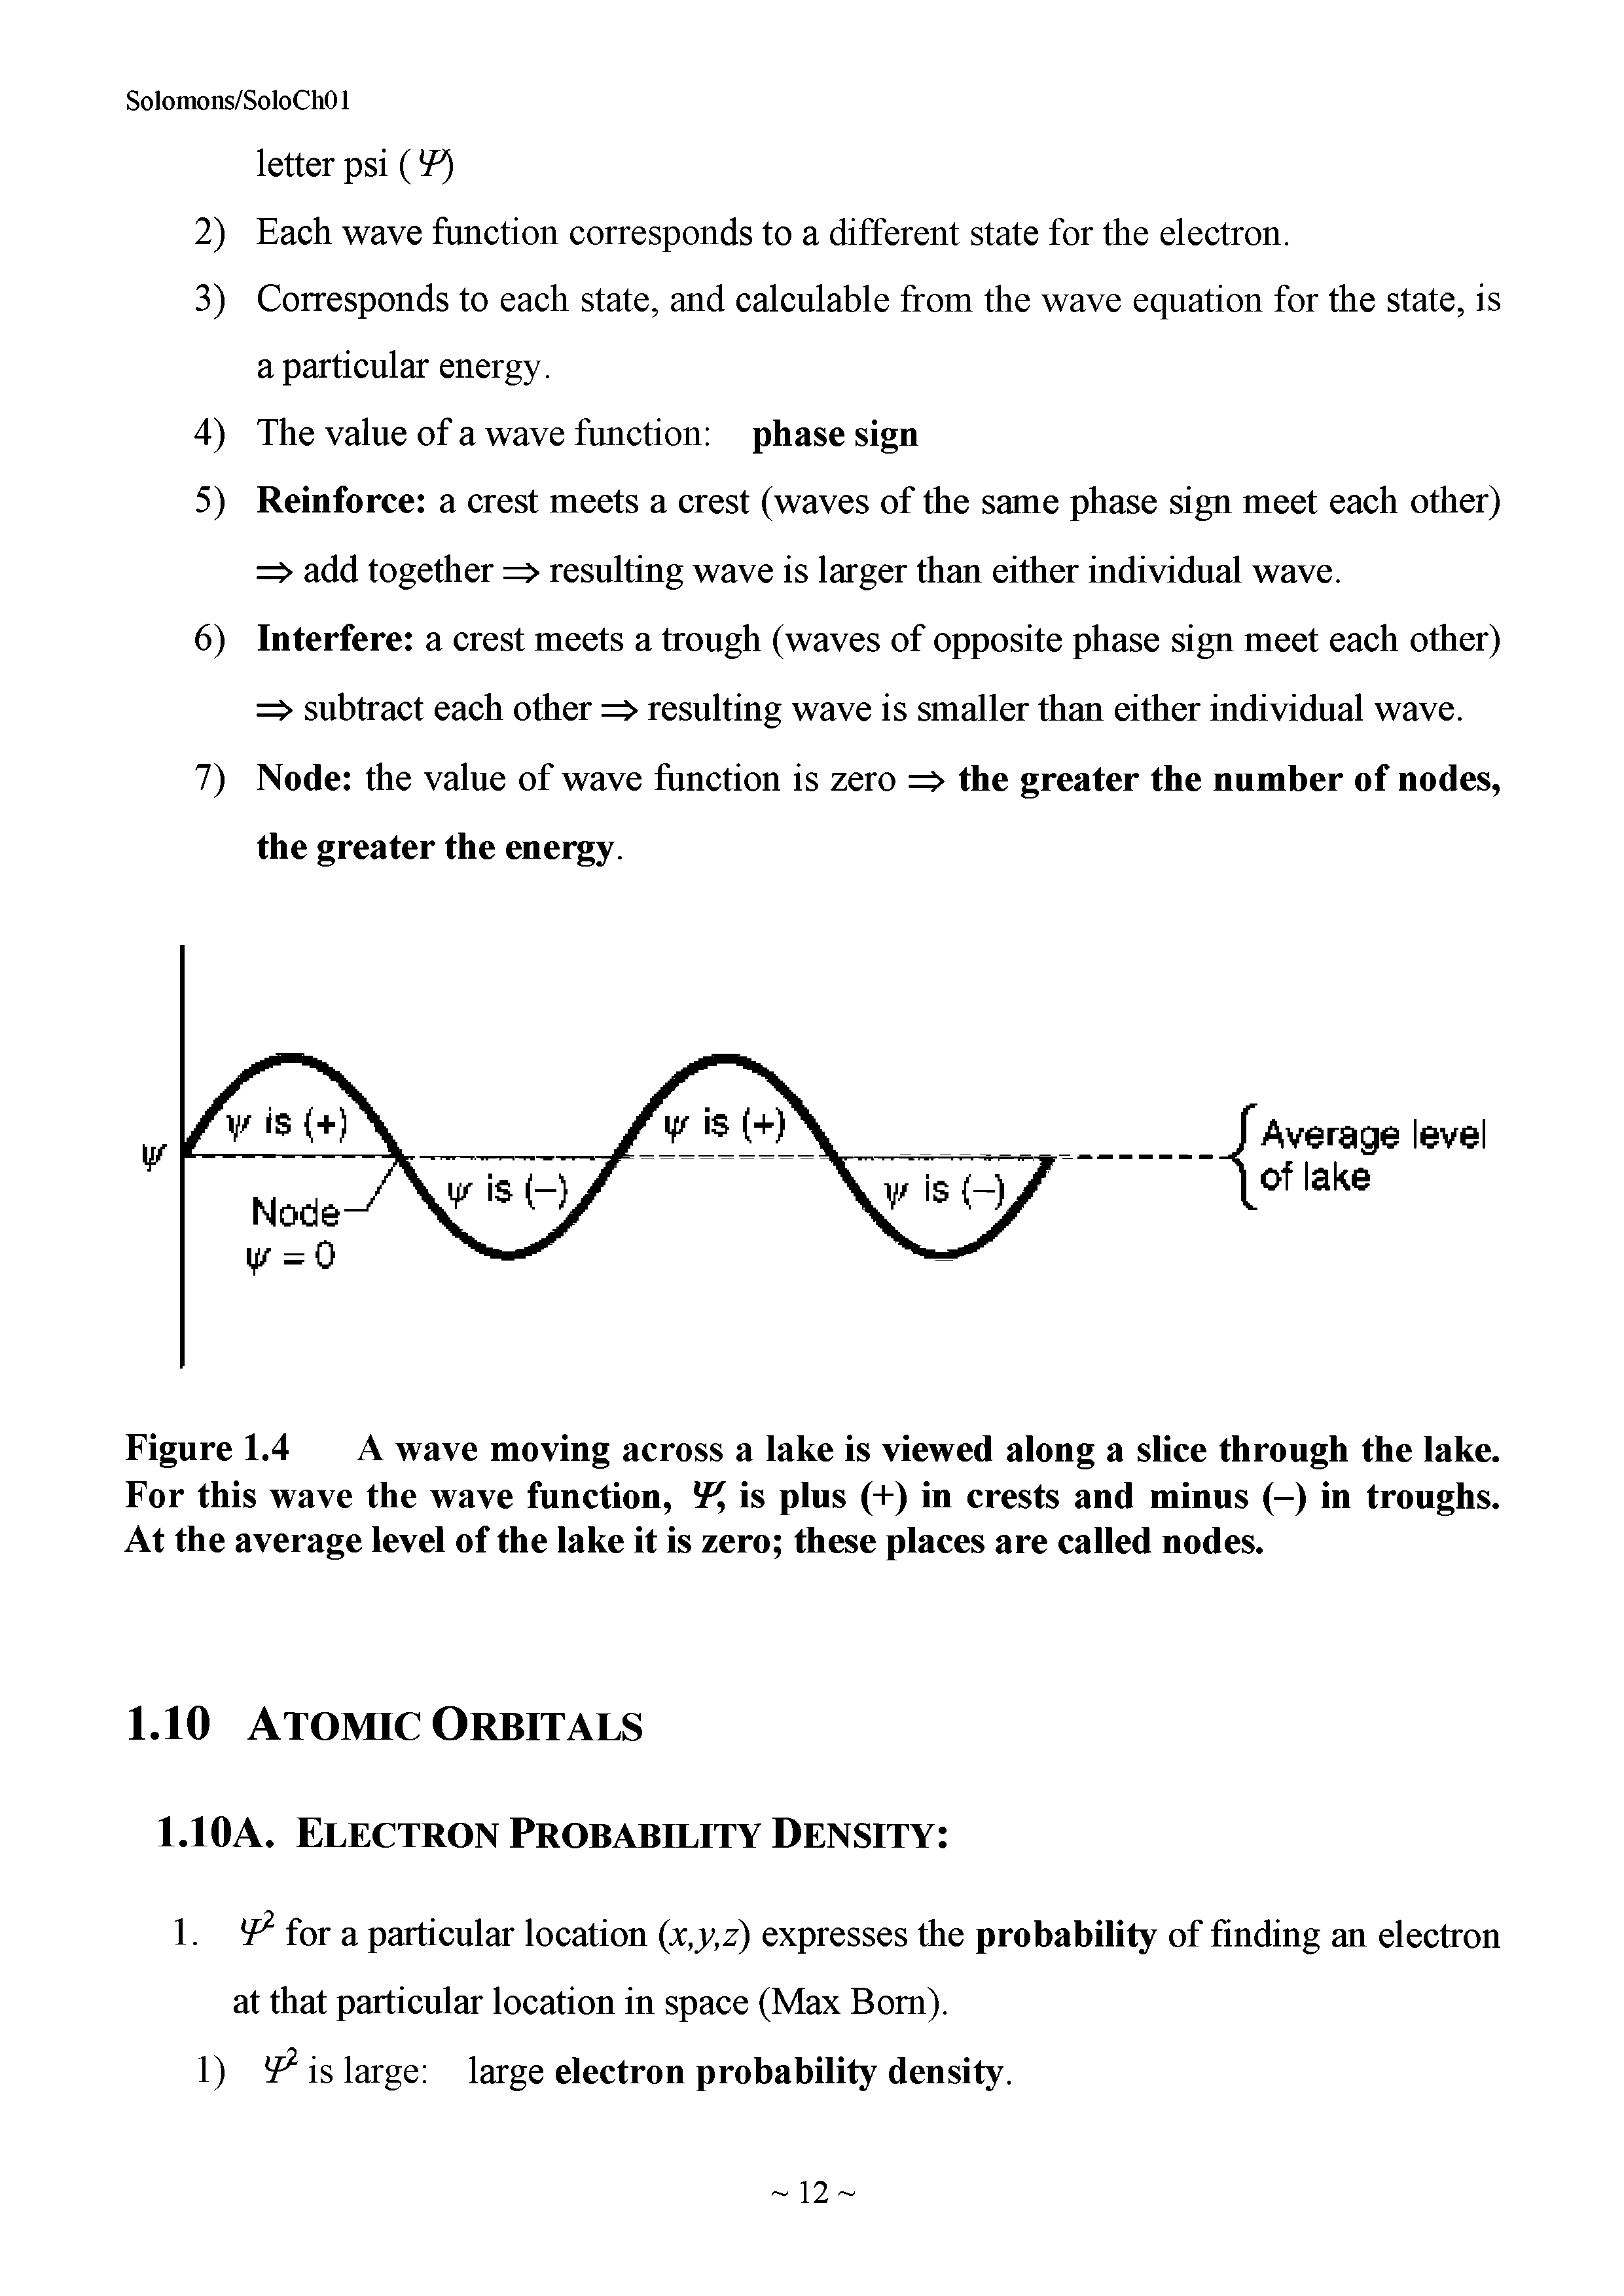 Figure 1.4 A wave moving across a lake is viewed along a slice through the lake. For this wave the wave function, W, is plus (+) in crests and minus (-) in troughs. At the average level of the lake it is zero these places are called nodes.